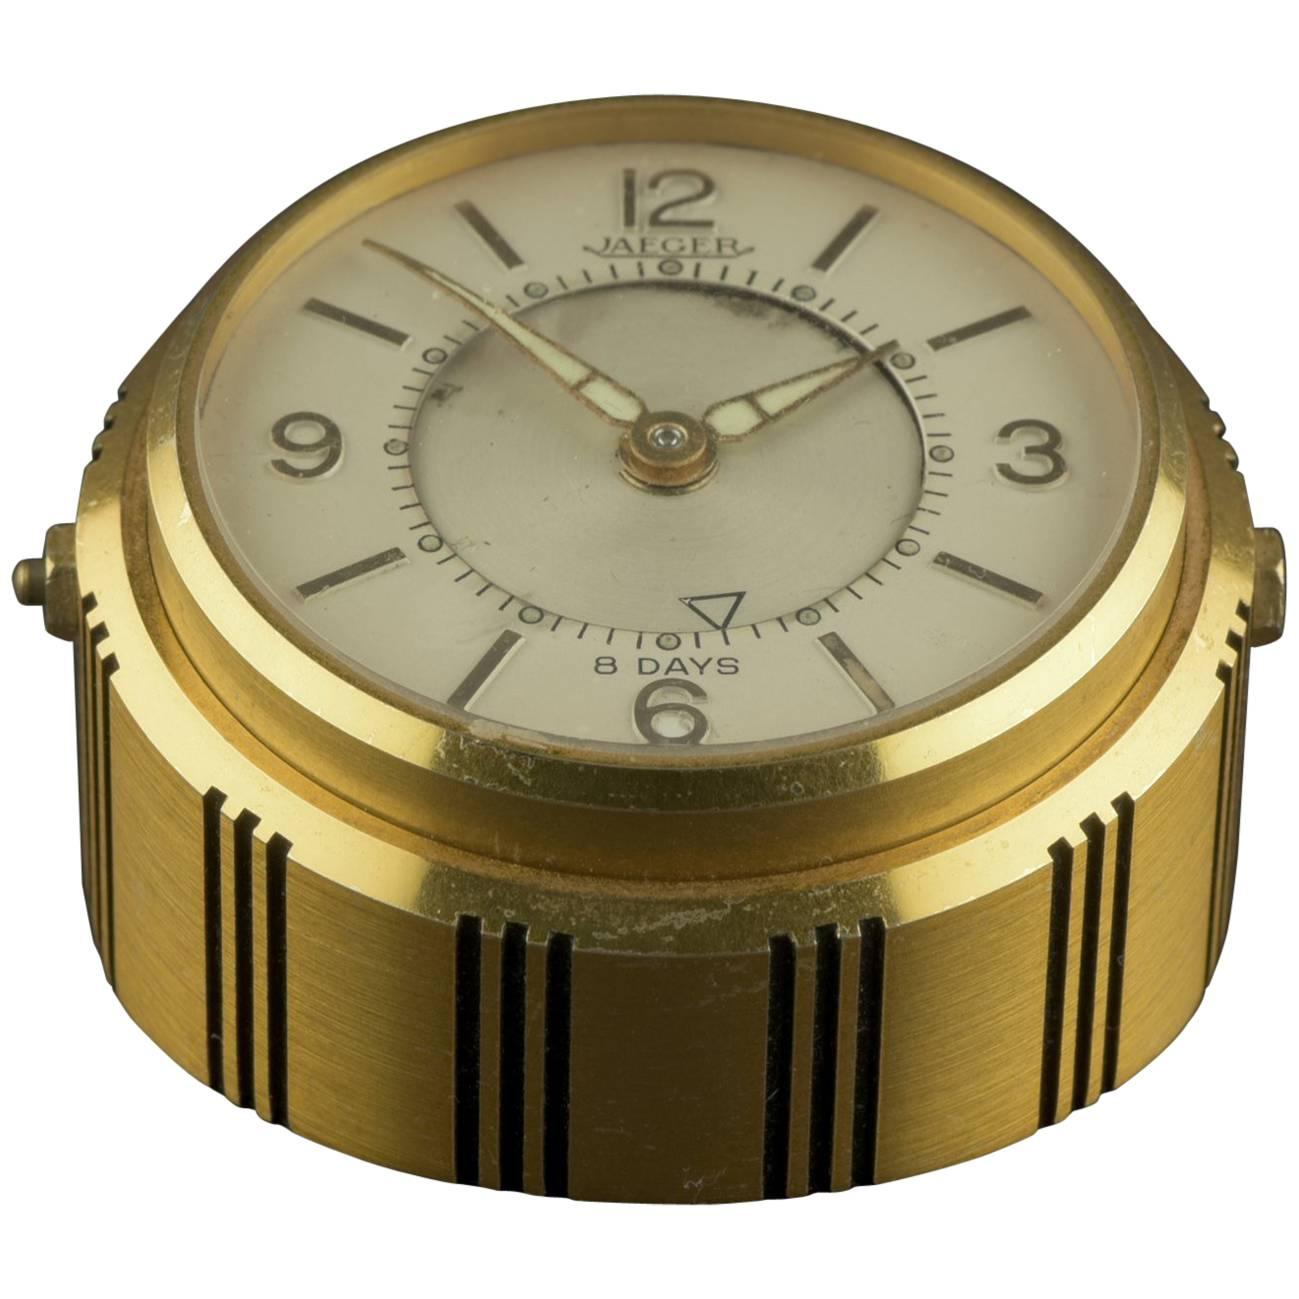 8 Day Travel Alarm Clock by Jaeger LeCoultre, 1950 For Sale